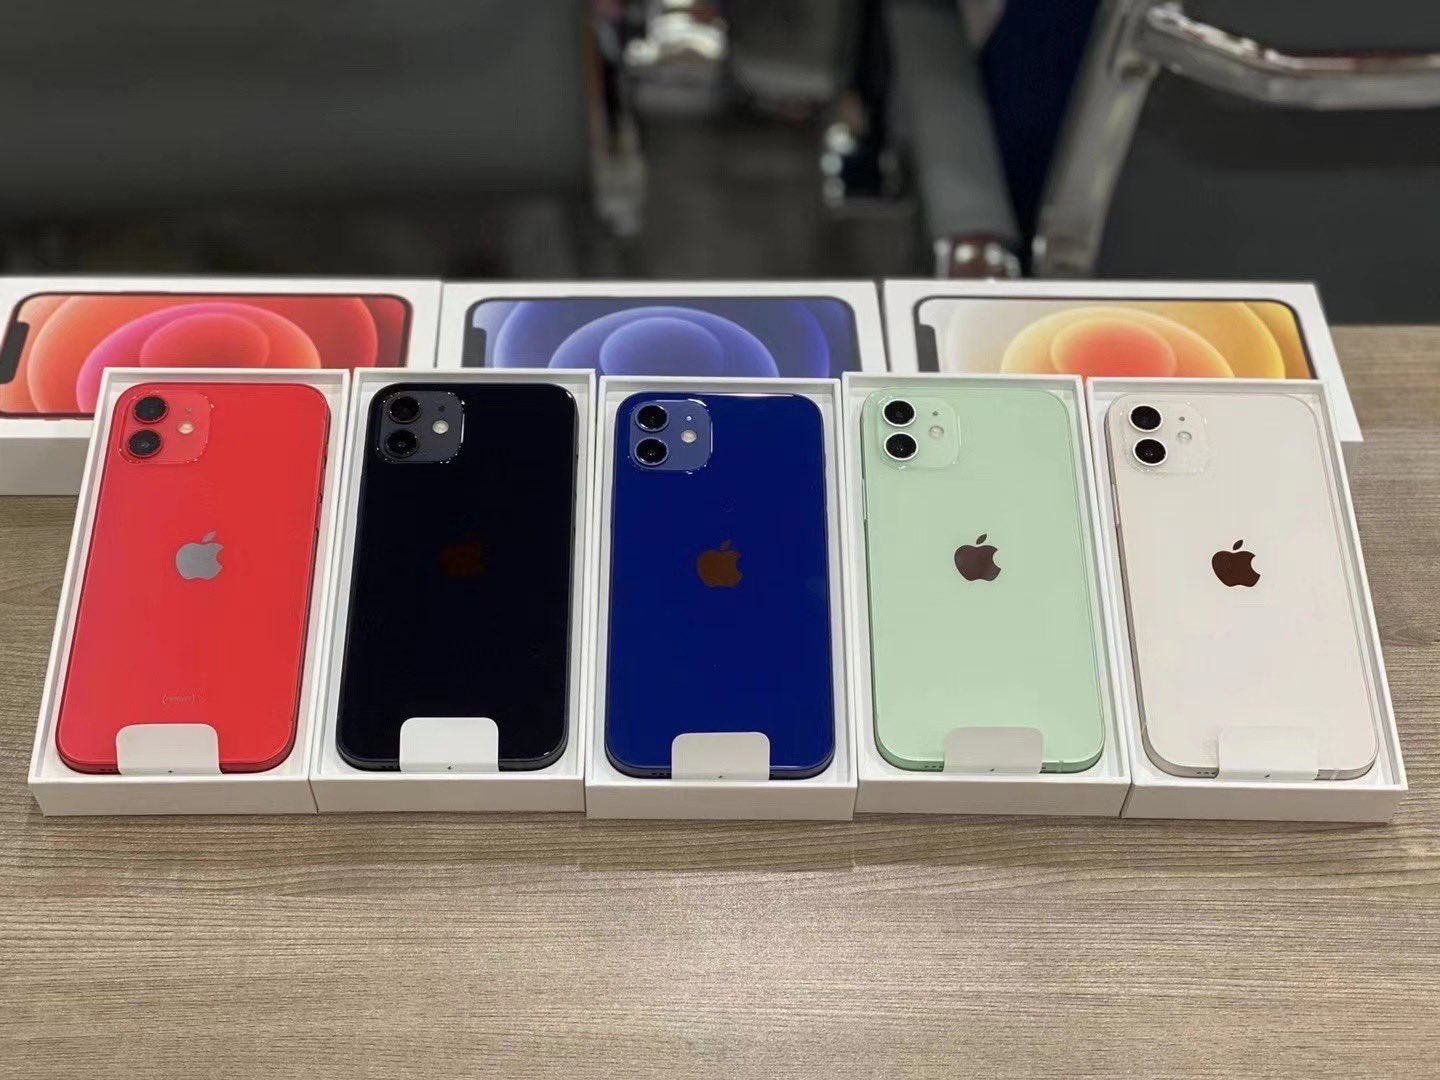 iPhone 12 colors: Which should you buy?